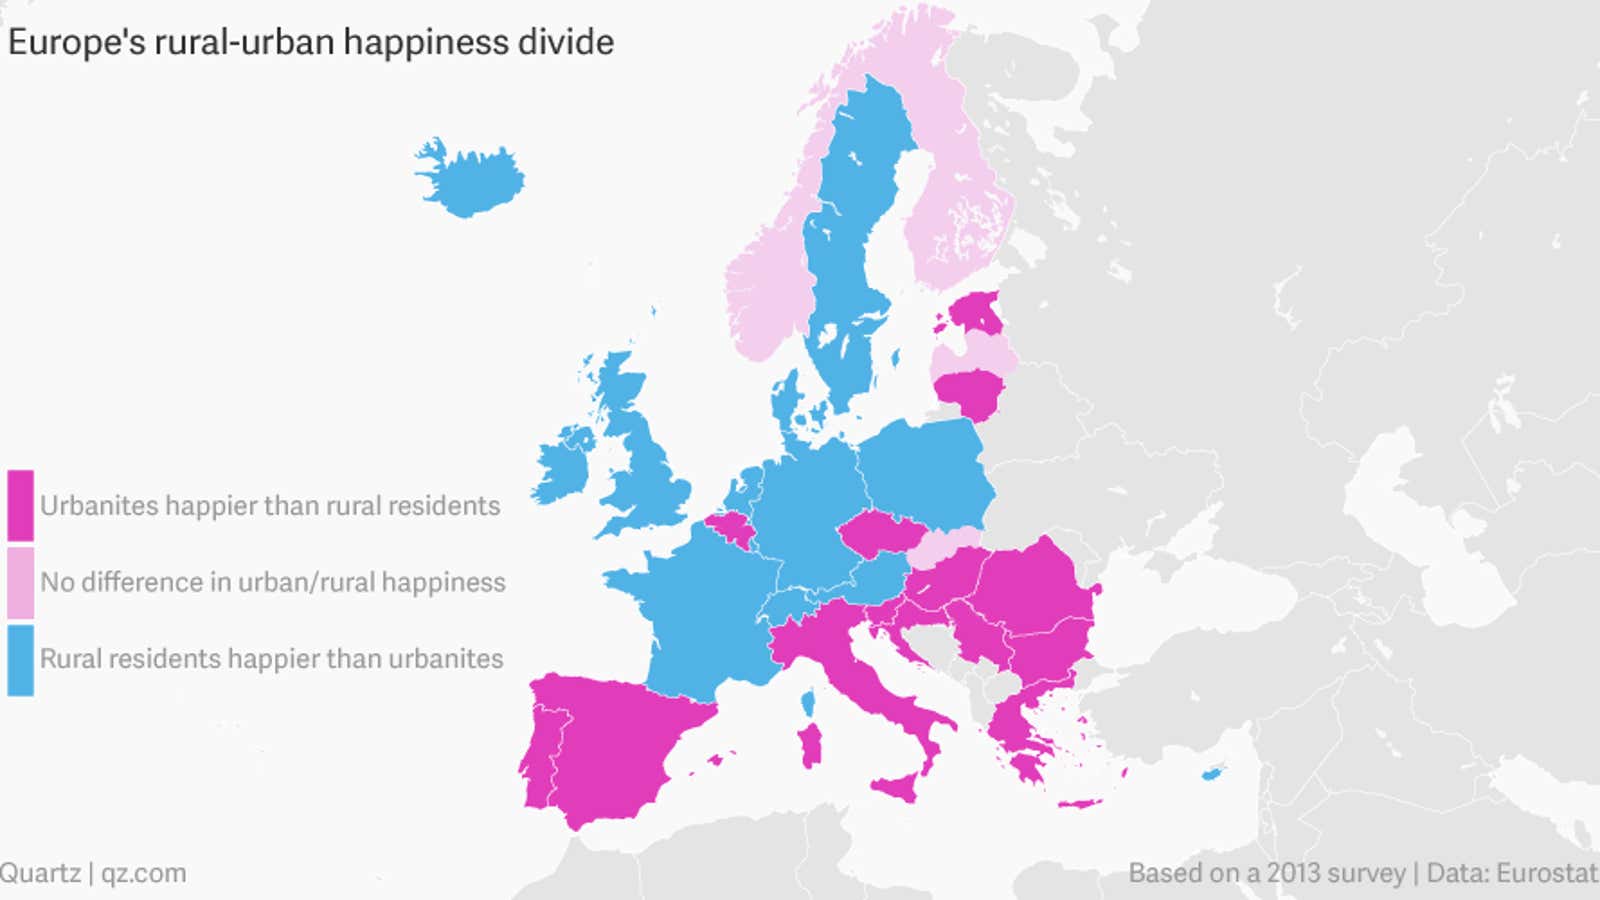 Europe’s other north-south divide: Where city dwellers are happier than rural residents